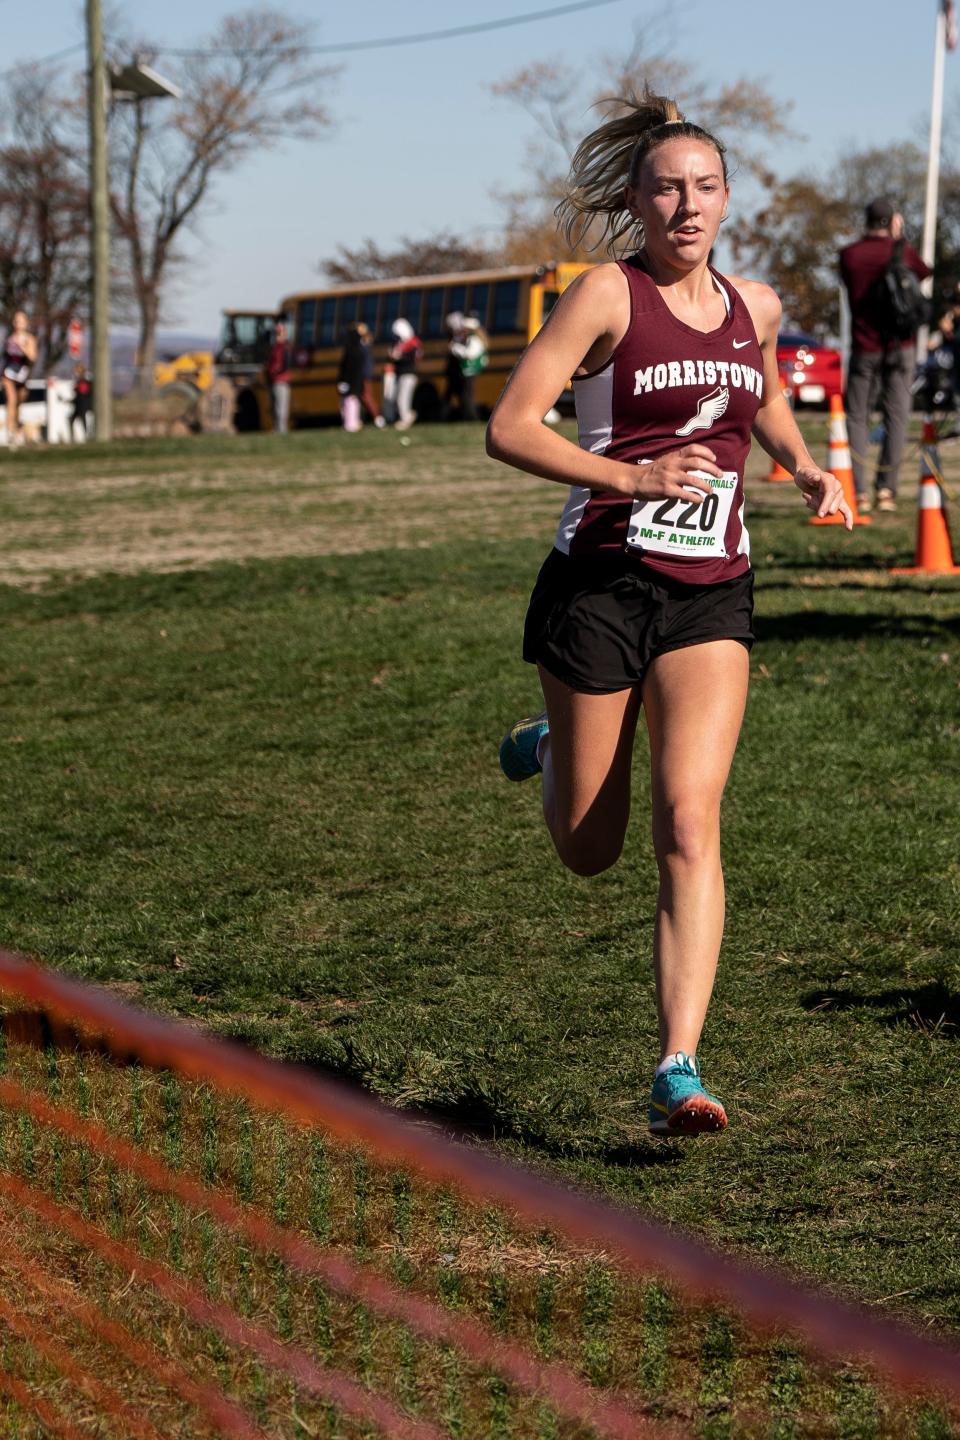 The State Sectional Cross-Country championships are held in Woodland Park, NJ on Saturday October 29, 2022. Grace DelGiorno with Morristown High School comes in second in the group four girls race. 